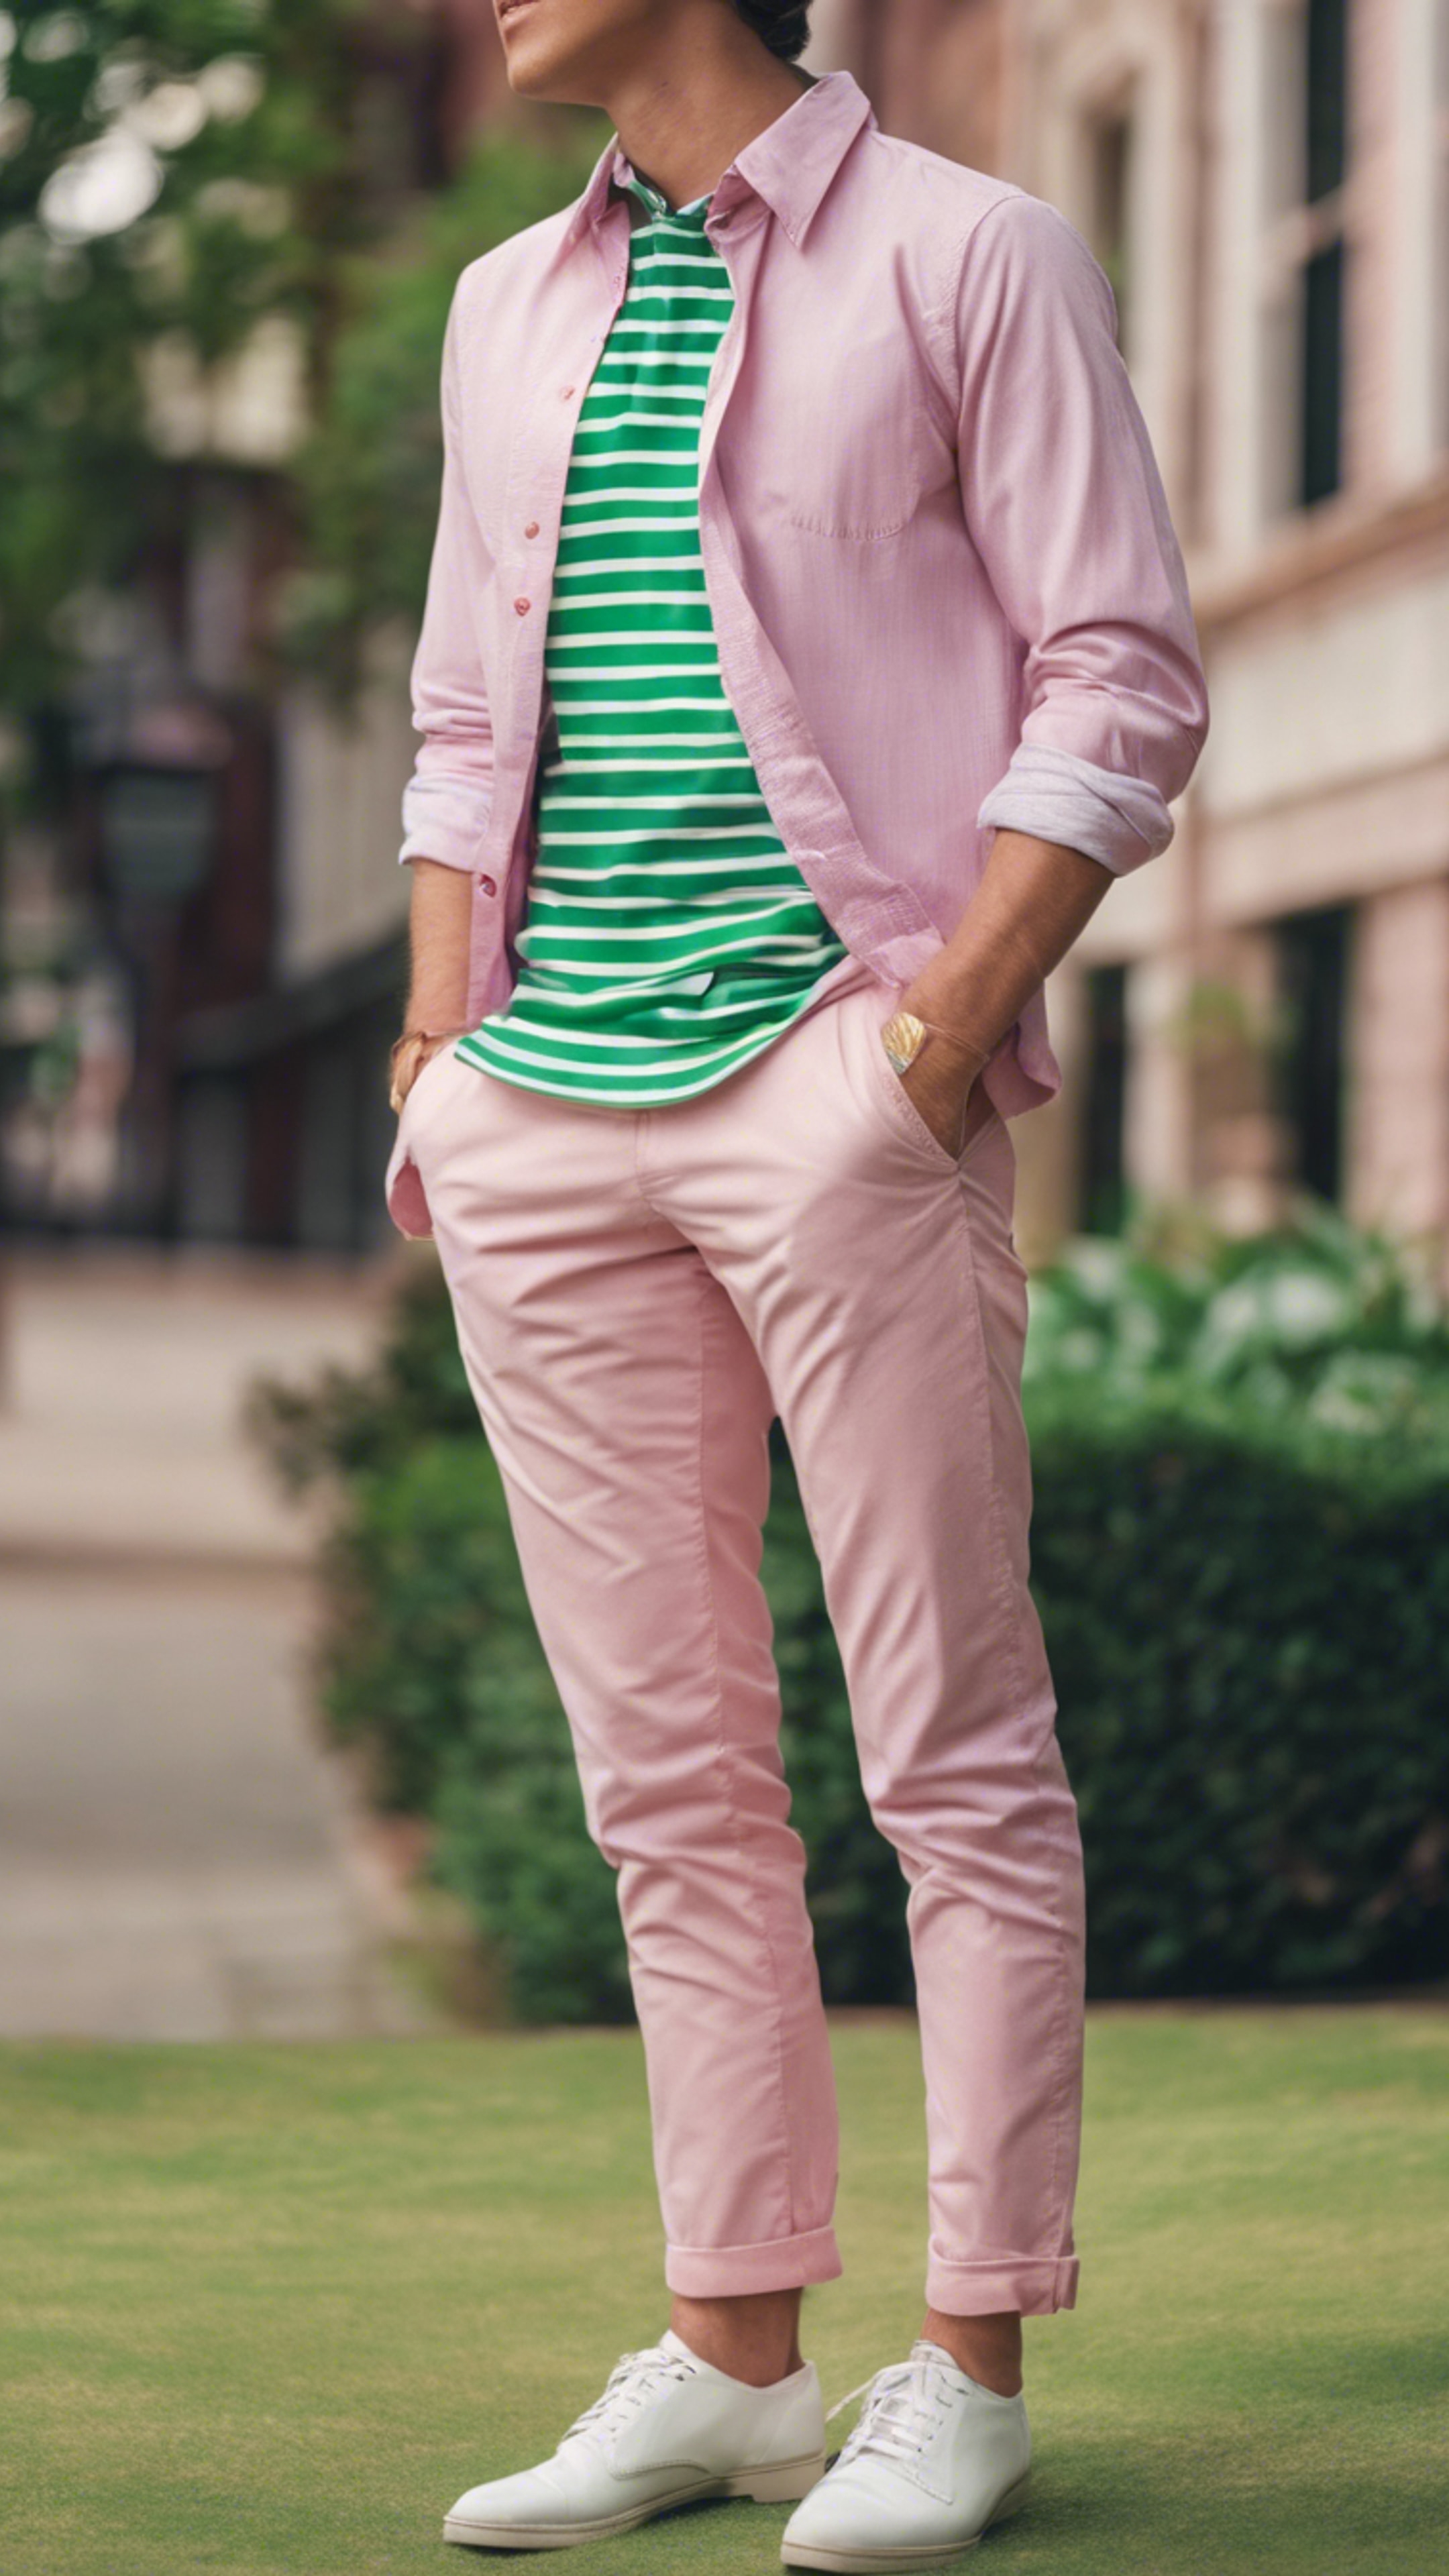 A classic preppy outfit in pink chinos with a green striped Oxford shirt. Fondo de pantalla[7b2809c9502f40299443]